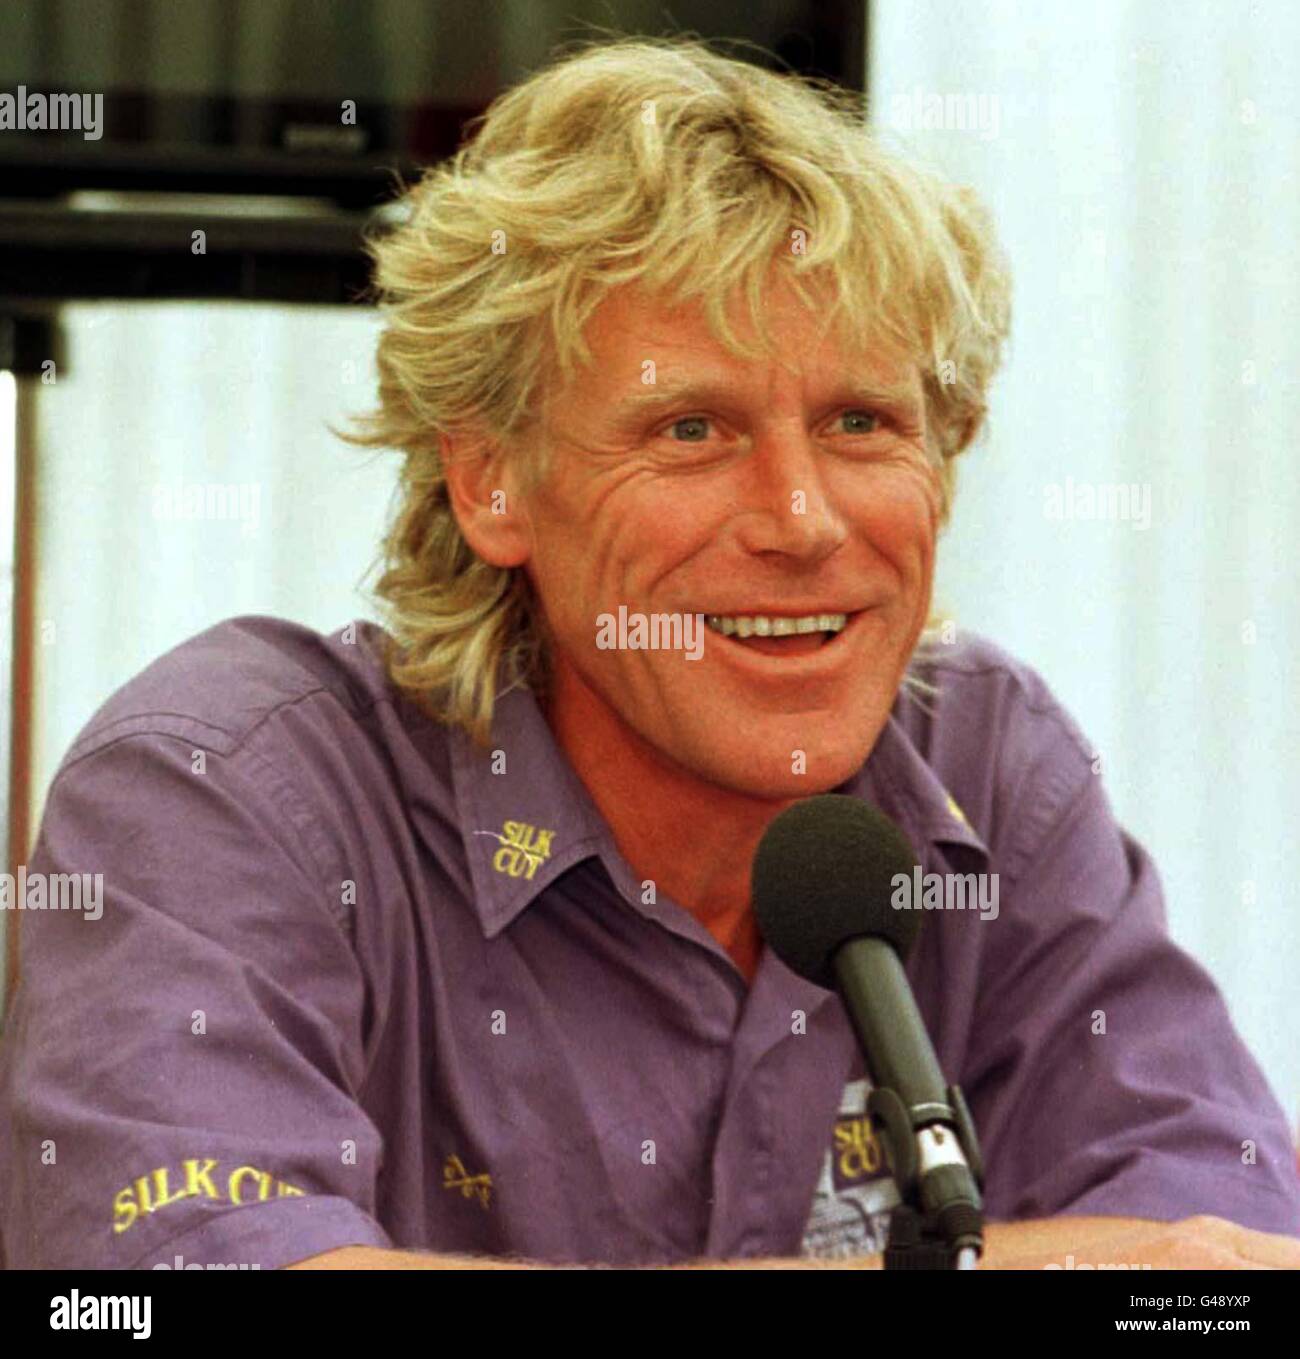 Whitbread Round the World Yatch Race Press Conference with Lawrie Smith, Silk Cut Captain in Southampton today (Thursday). Photo by Tim Ockenden/PA Stock Photo